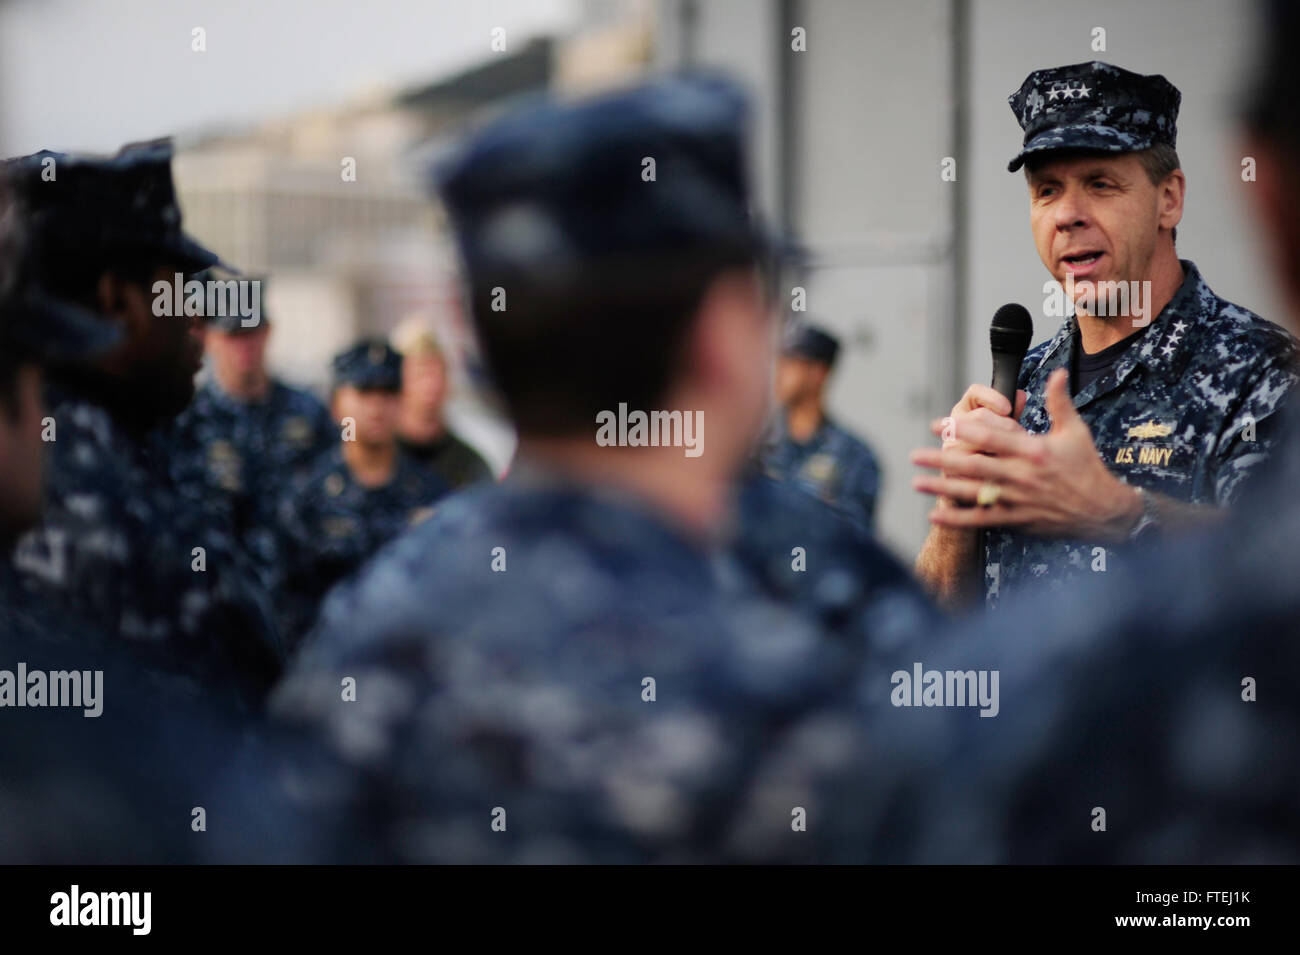 NAPLES, Italy (Jan. 24, 2014) Vice Adm. Phil Davidson, commander, U.S. 6th Fleet, addresses the crew of the Oliver Hazard Perry-class frigate USS Taylor (FFG 50) during an all-hands call. During the visit, Davidson also toured the ship and met with the ship's senior leadership. Stock Photo